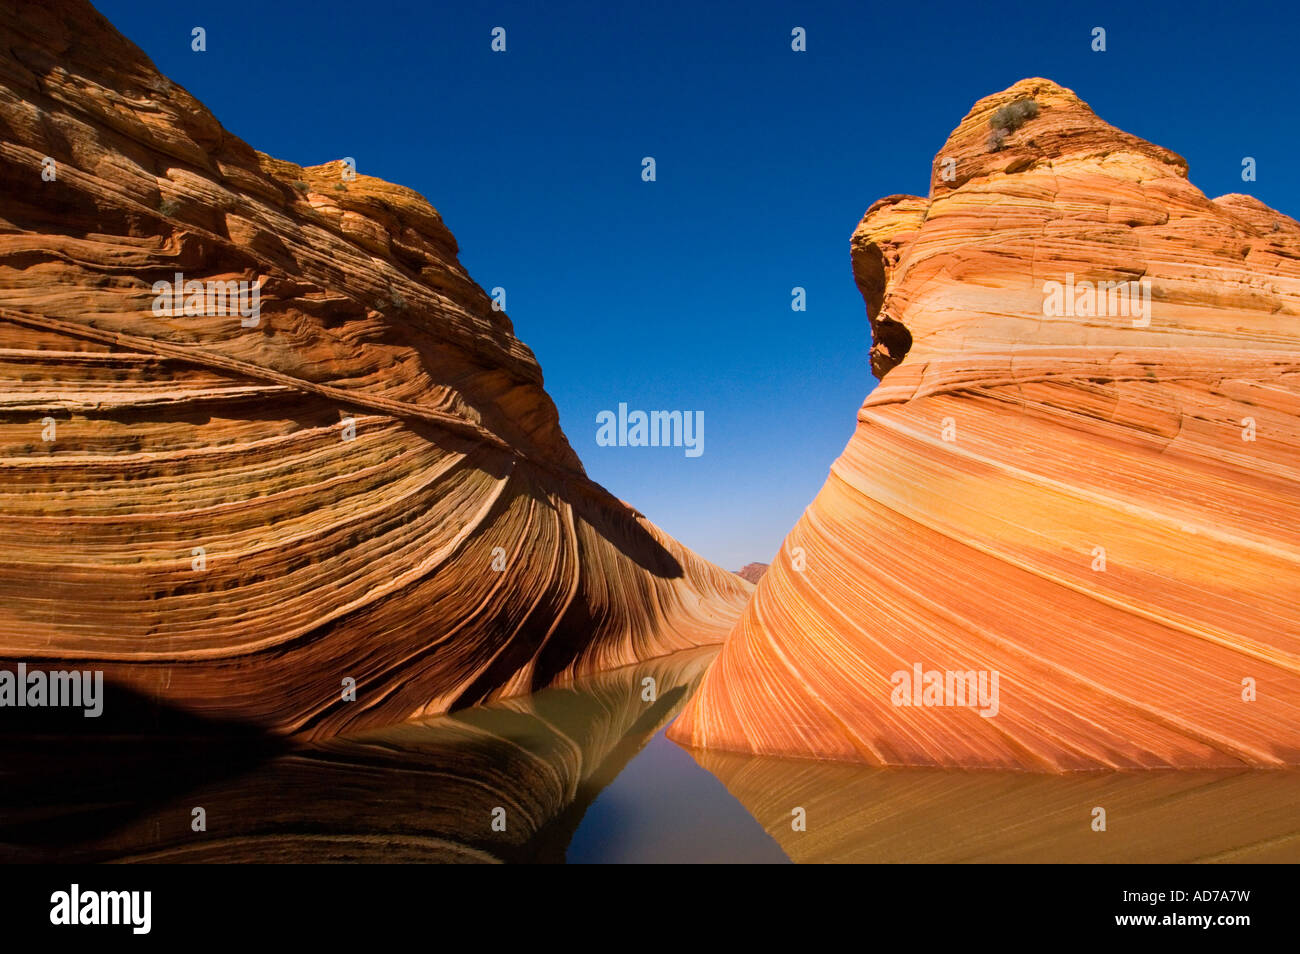 striated sandstone at The Wave Coyote Buttes Paria Canyon Vermilion Cliffs Wilderness Arizona Stock Photo